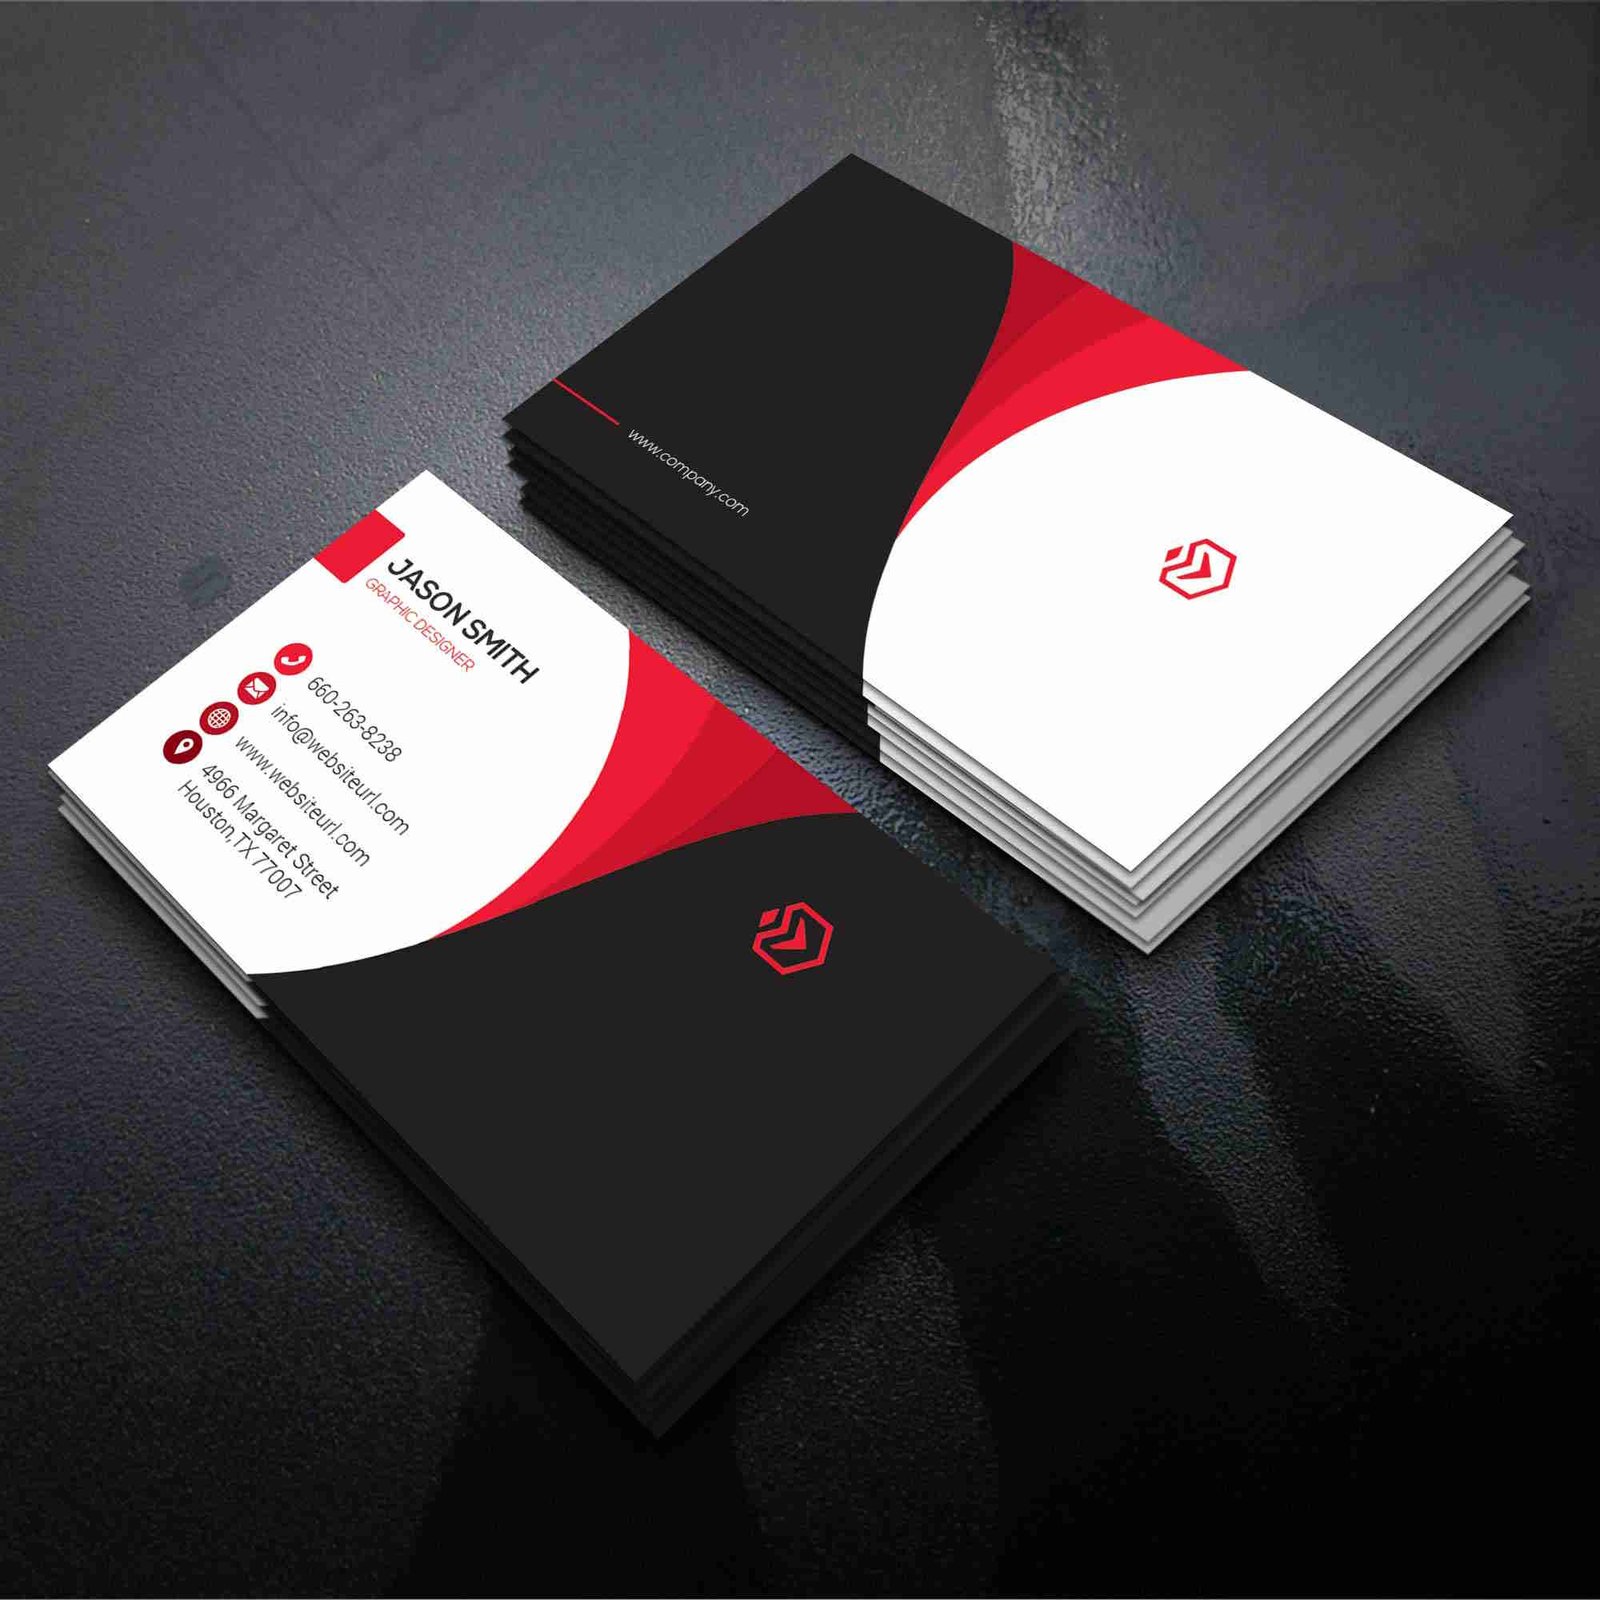 Top 5 business card design ideas for the best first impression